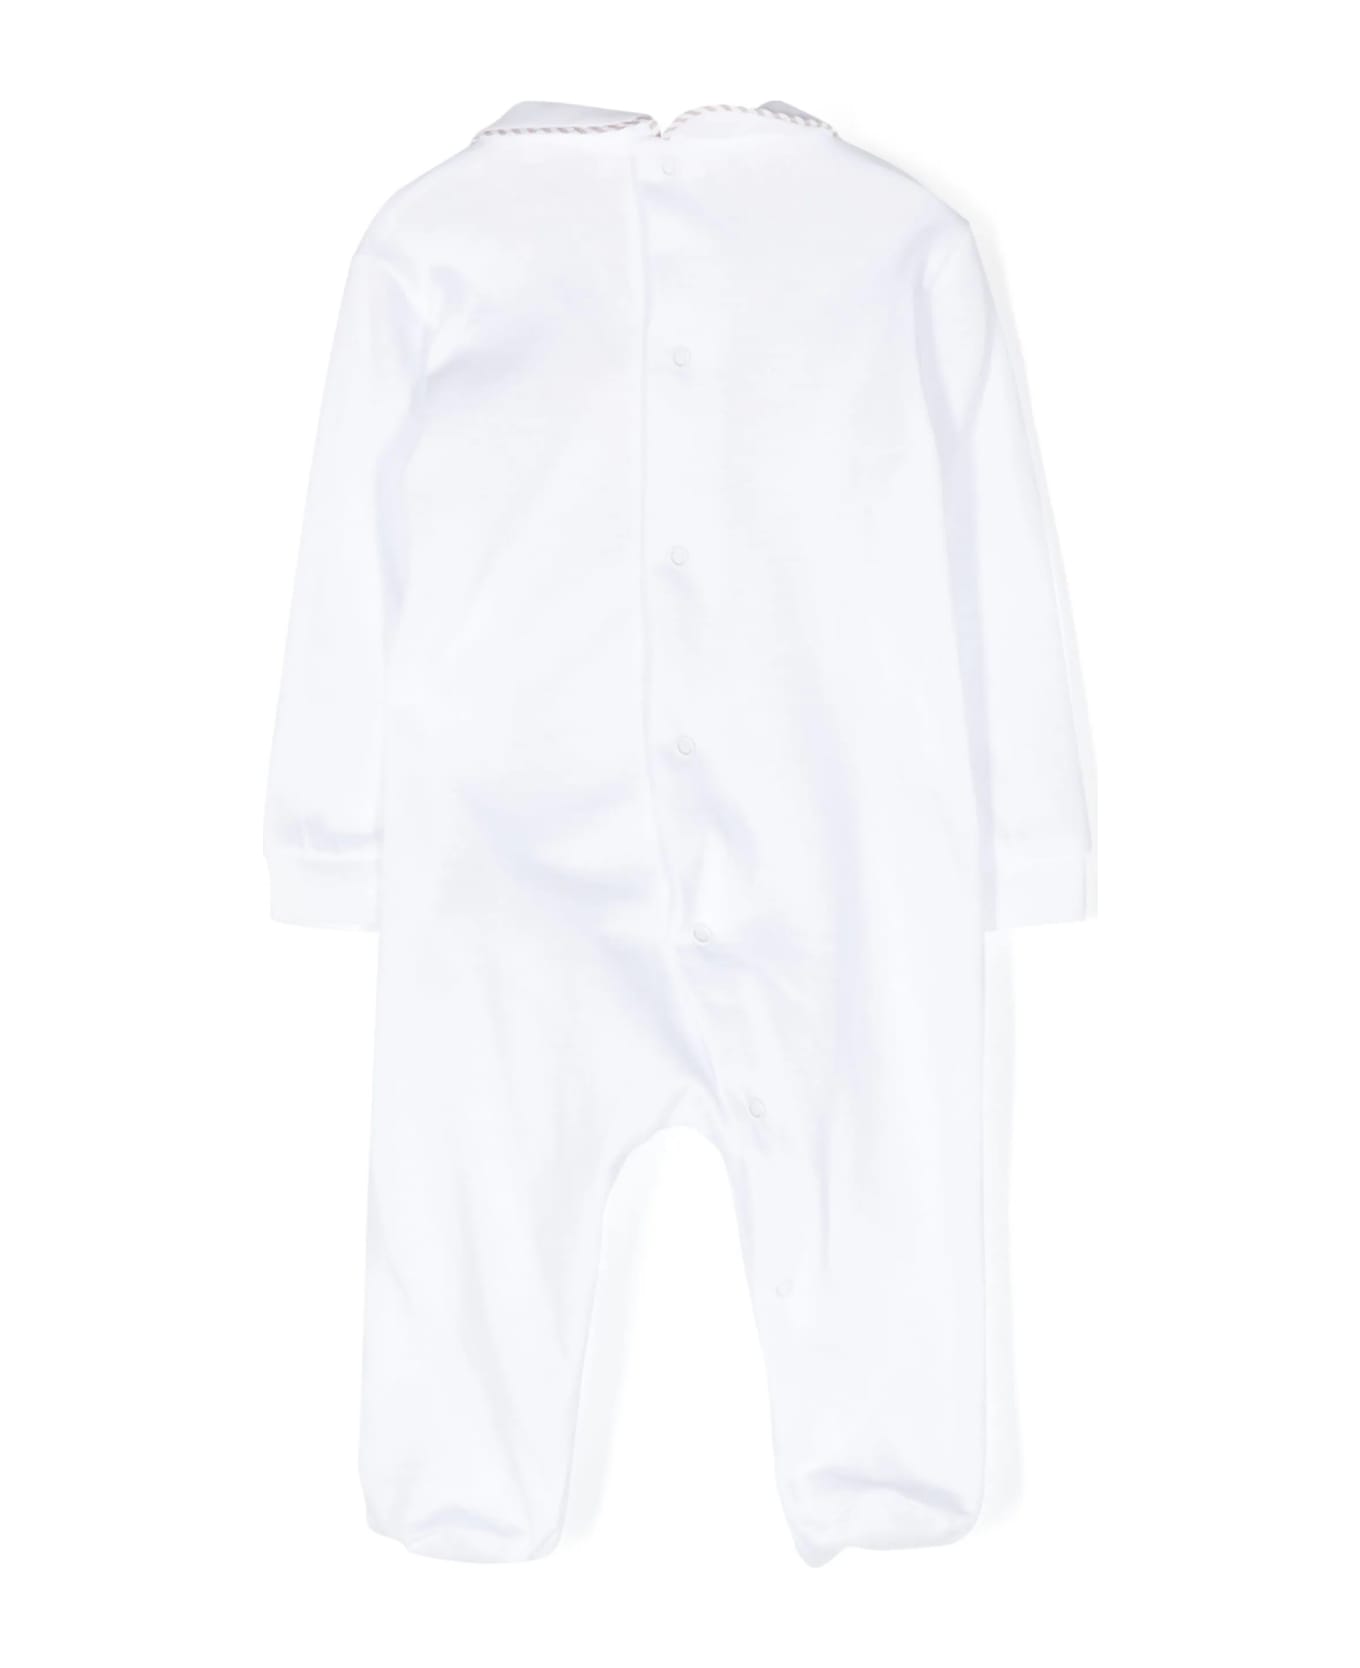 Il Gufo White Playsuit With Feet And Teddy-bear Embellishment - White